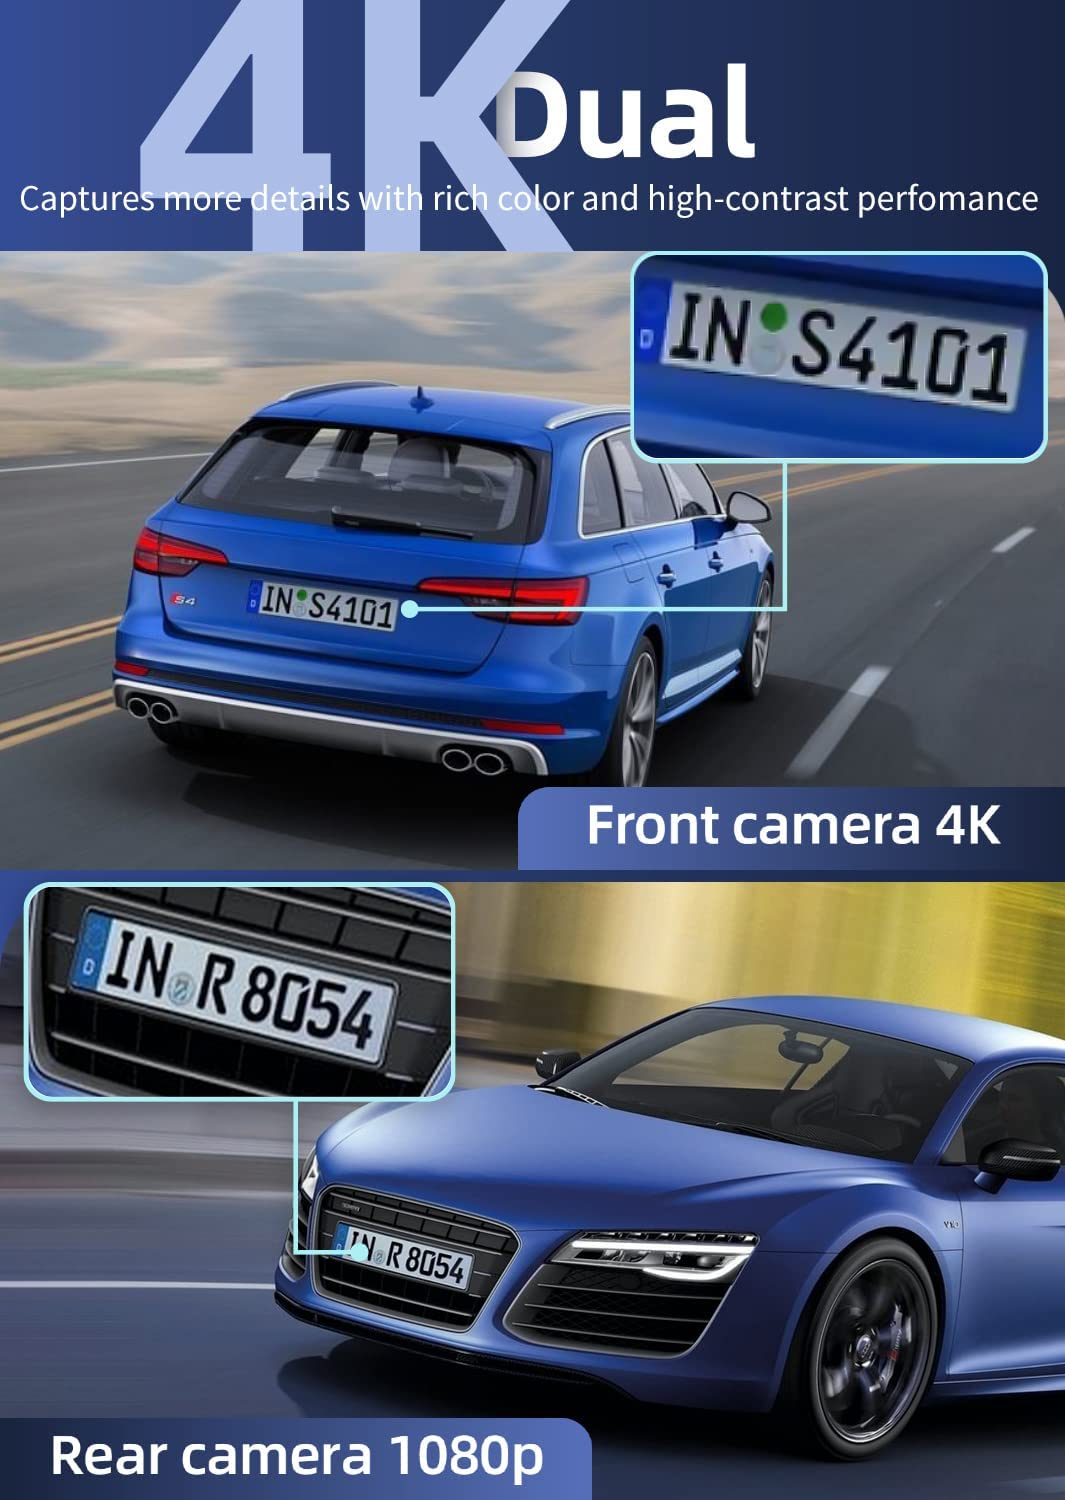 REDTIGER Dash Cam Front and Rear, 4K/2.5K Full HD Dash Camera with